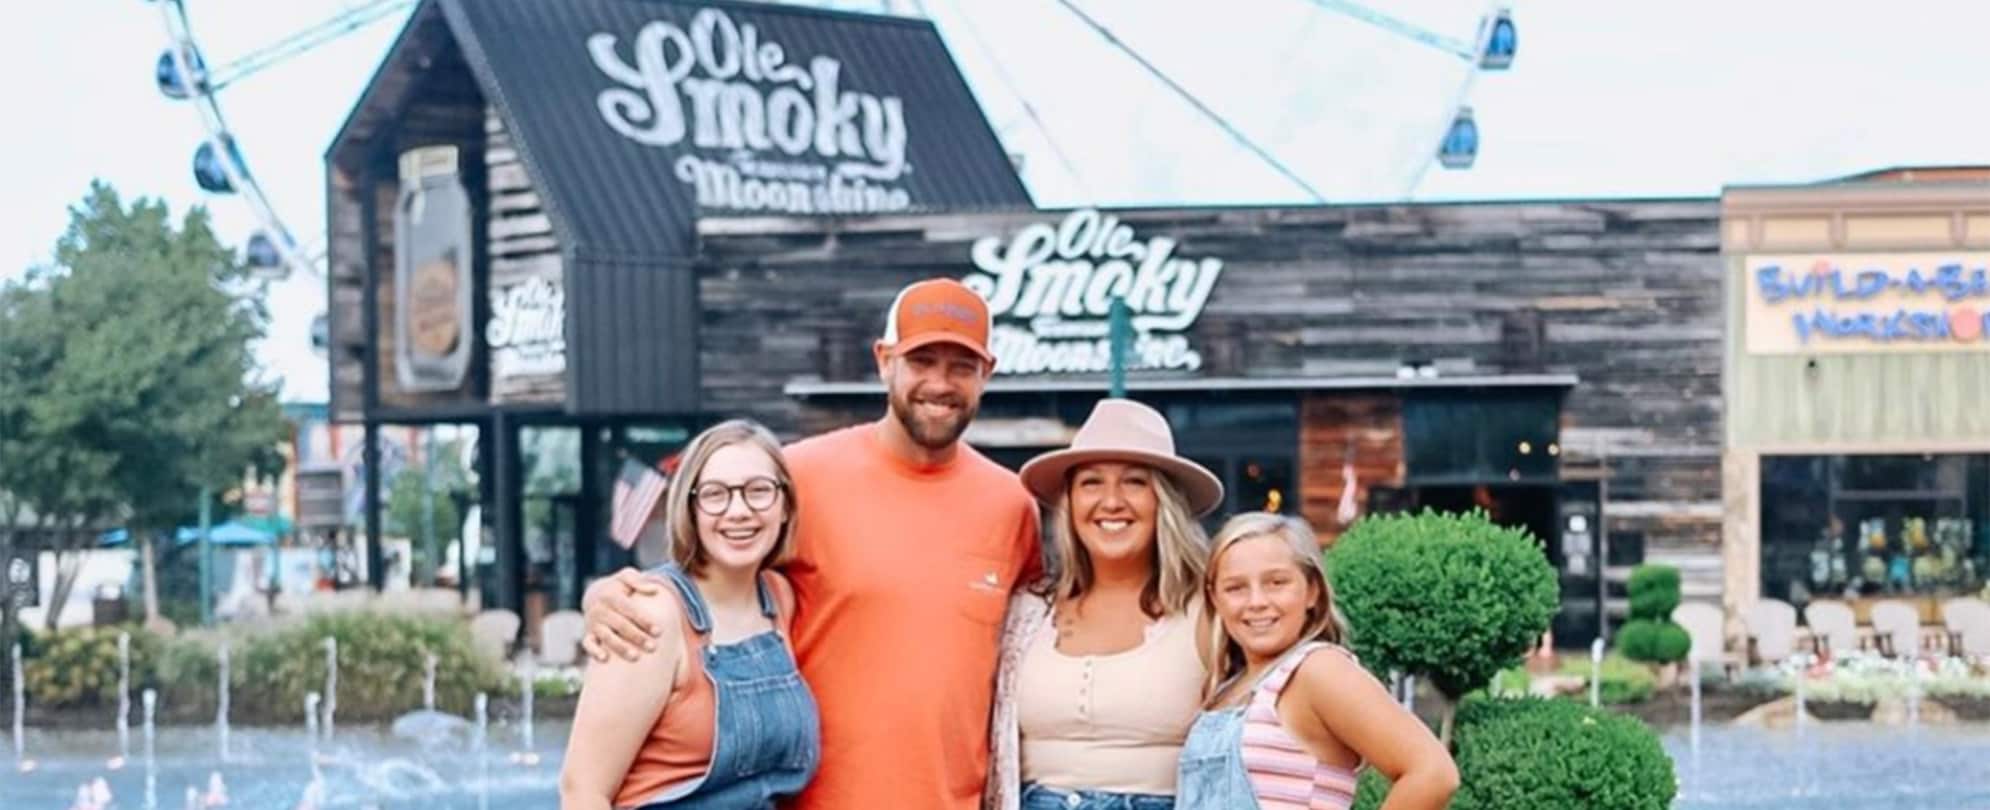 A family of four smiles in front of the Ole Smoky Moonshine Distillery in Gatlinburg, Tennessee